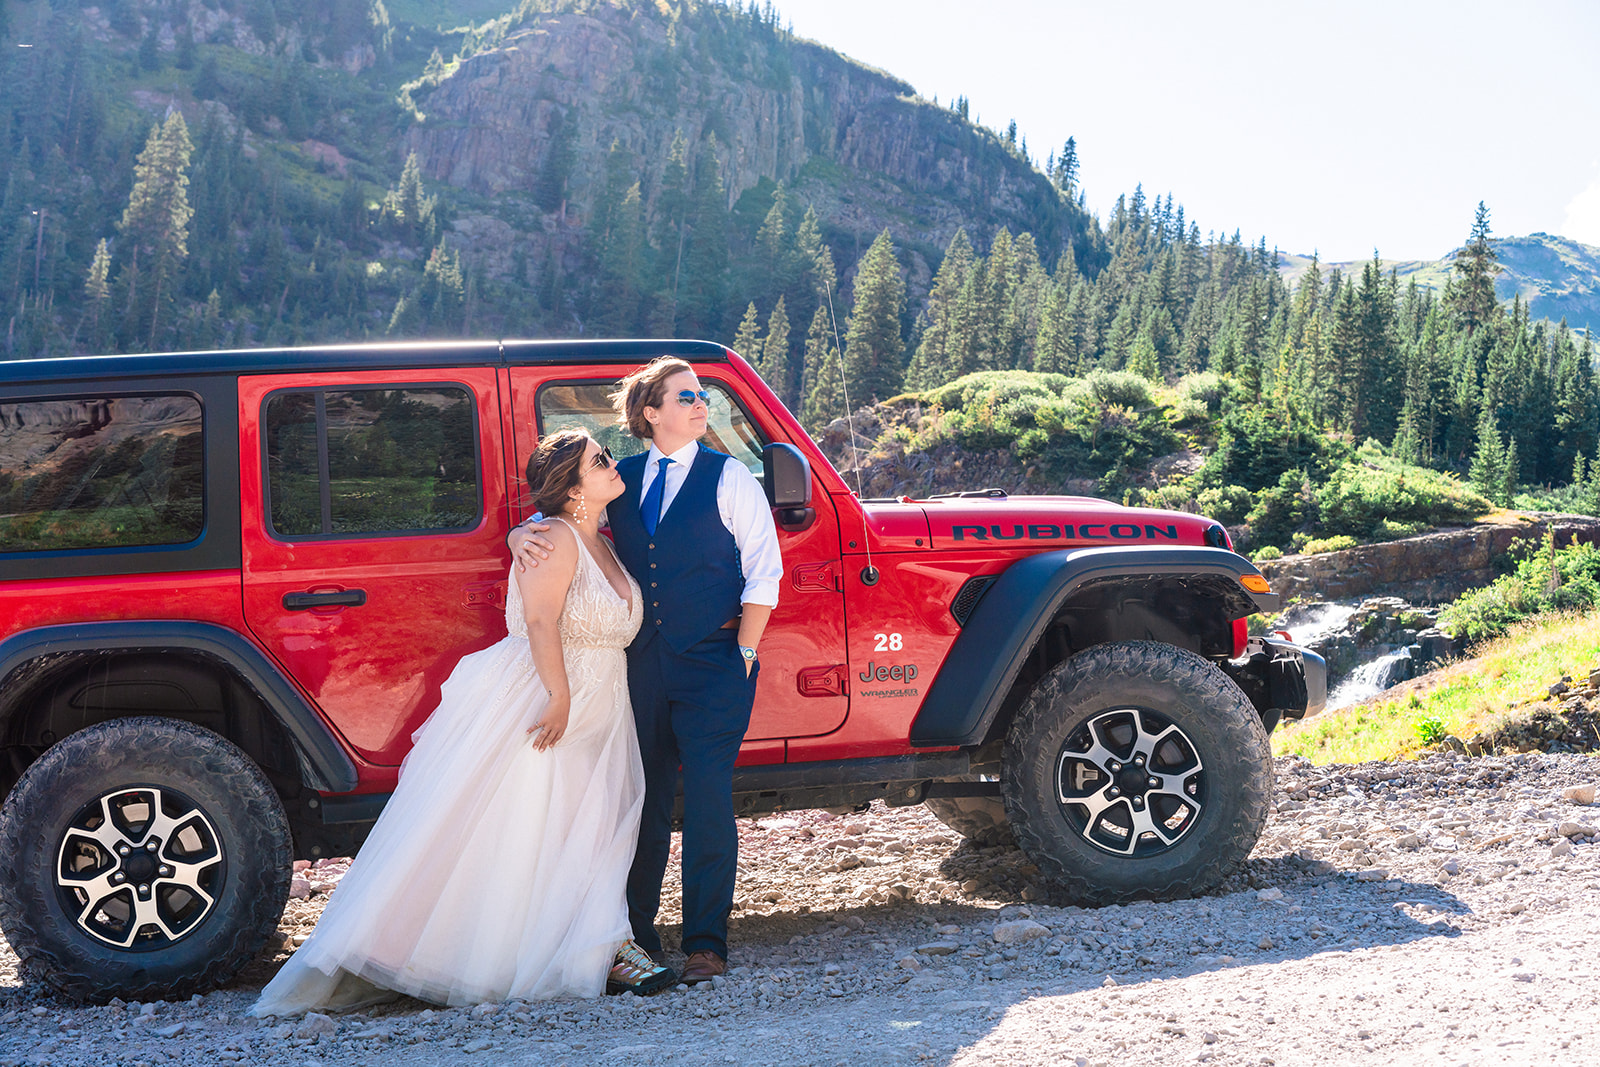 Lesbian couple standing near red Jeep